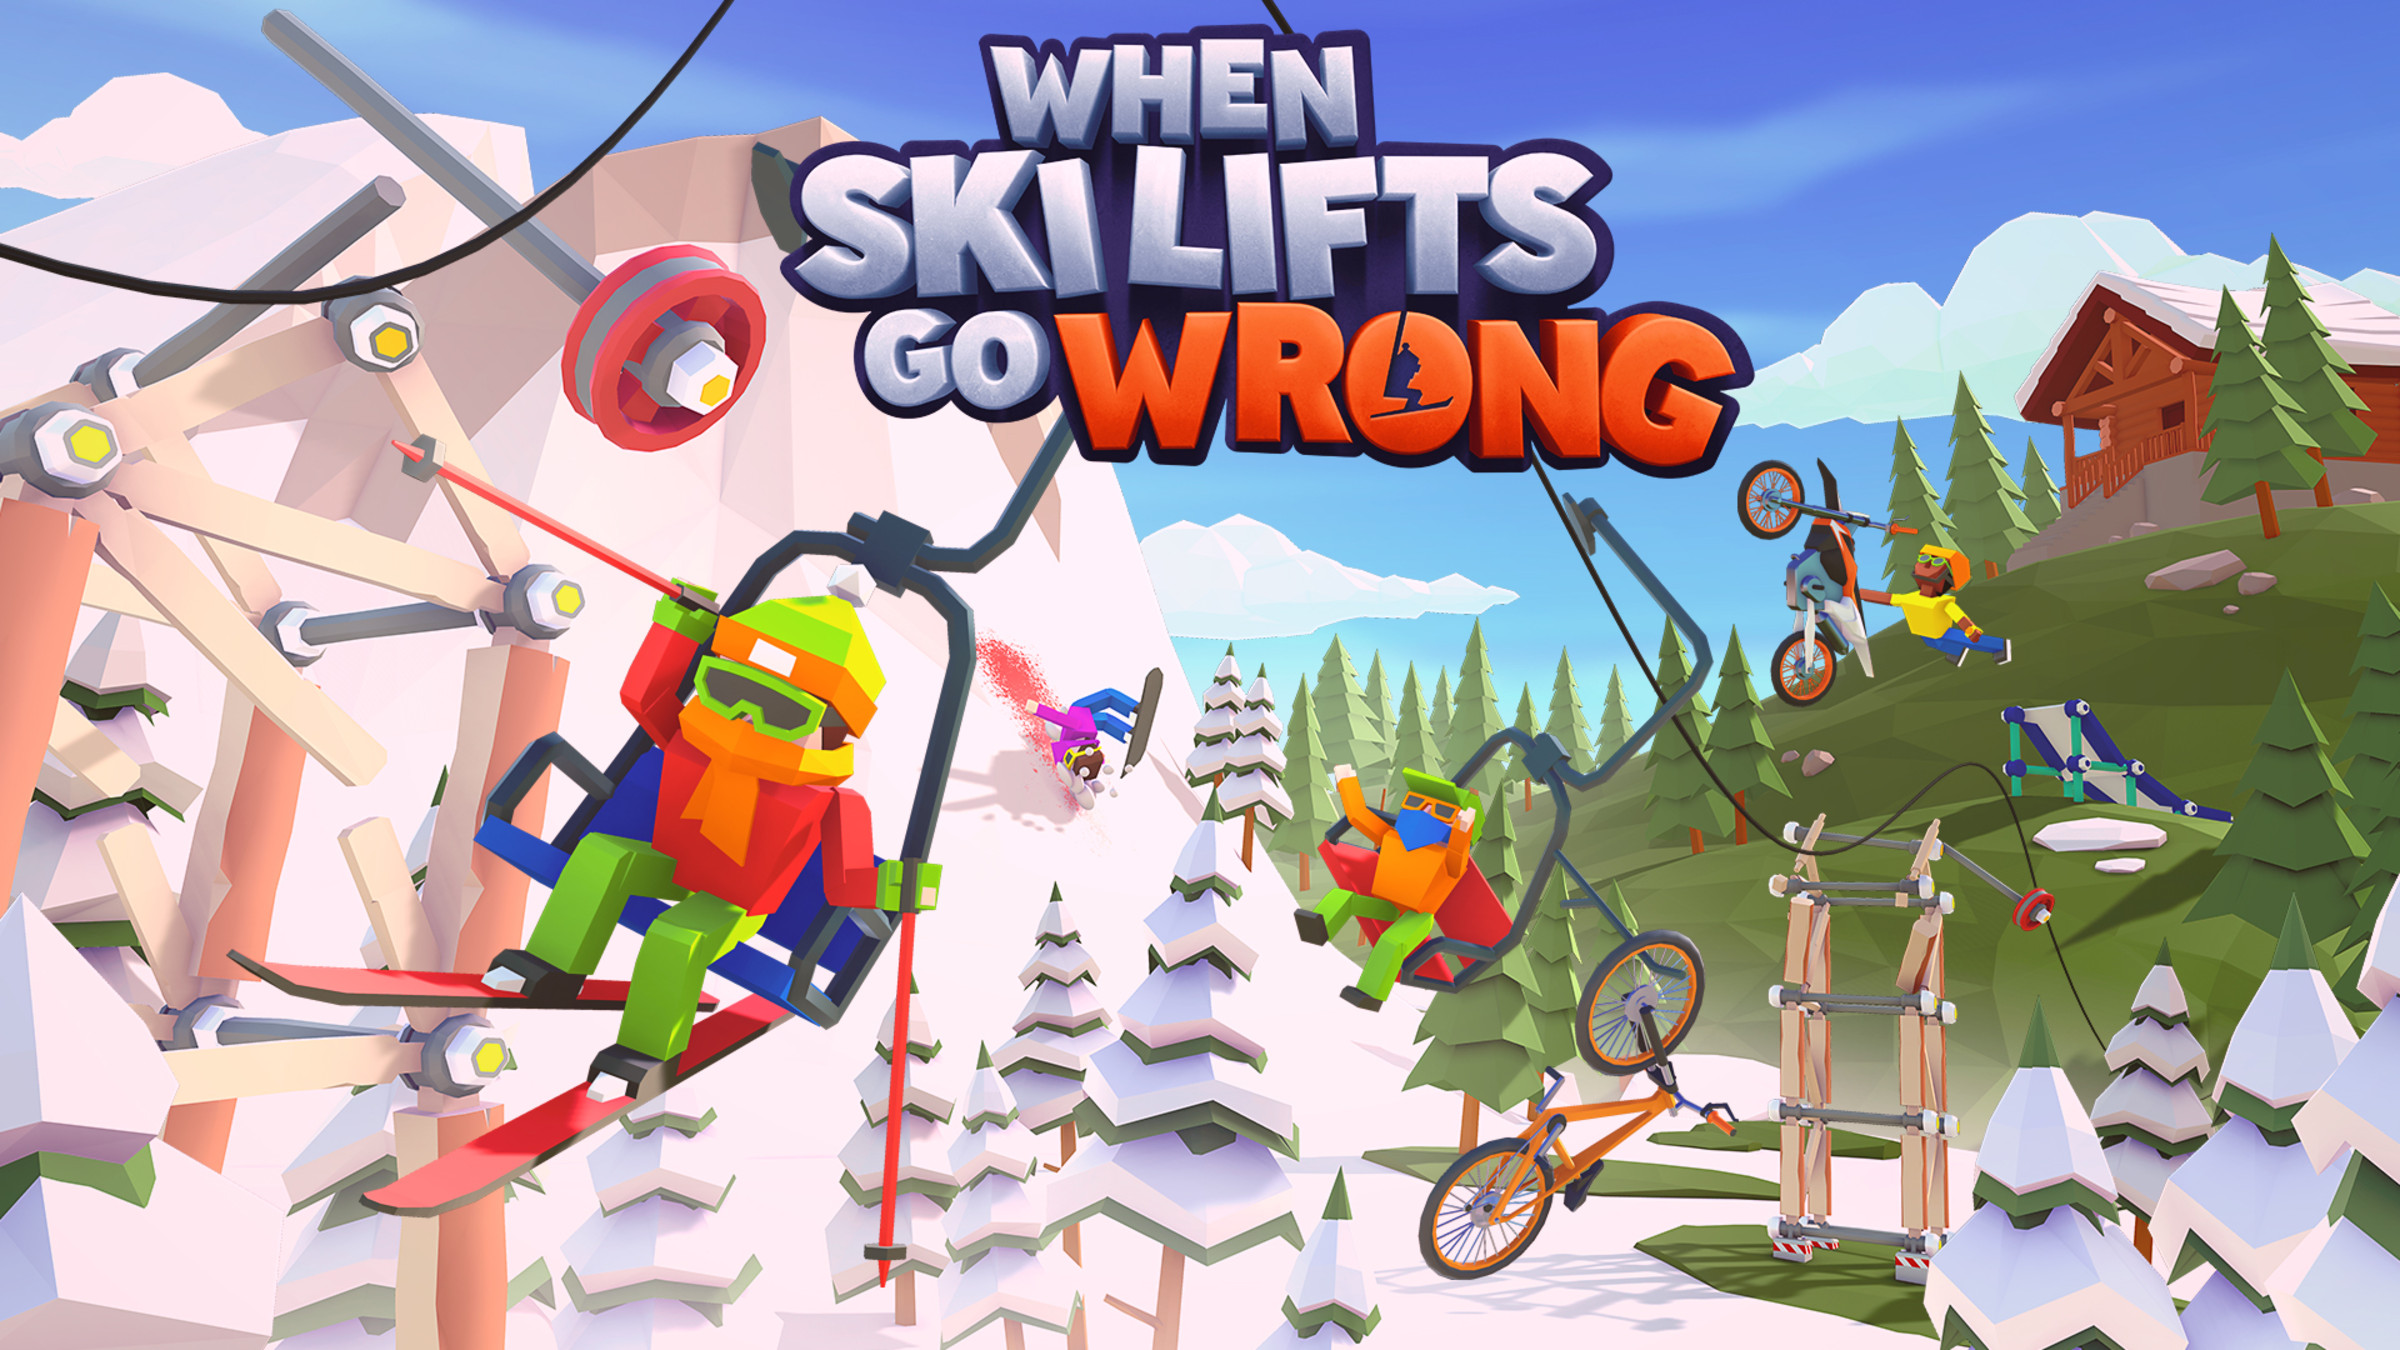 https://assets.nintendo.com/image/upload/c_fill,w_1200/q_auto:best/f_auto/dpr_2.0/ncom/en_US/games/switch/w/when-ski-lifts-go-wrong-switch/